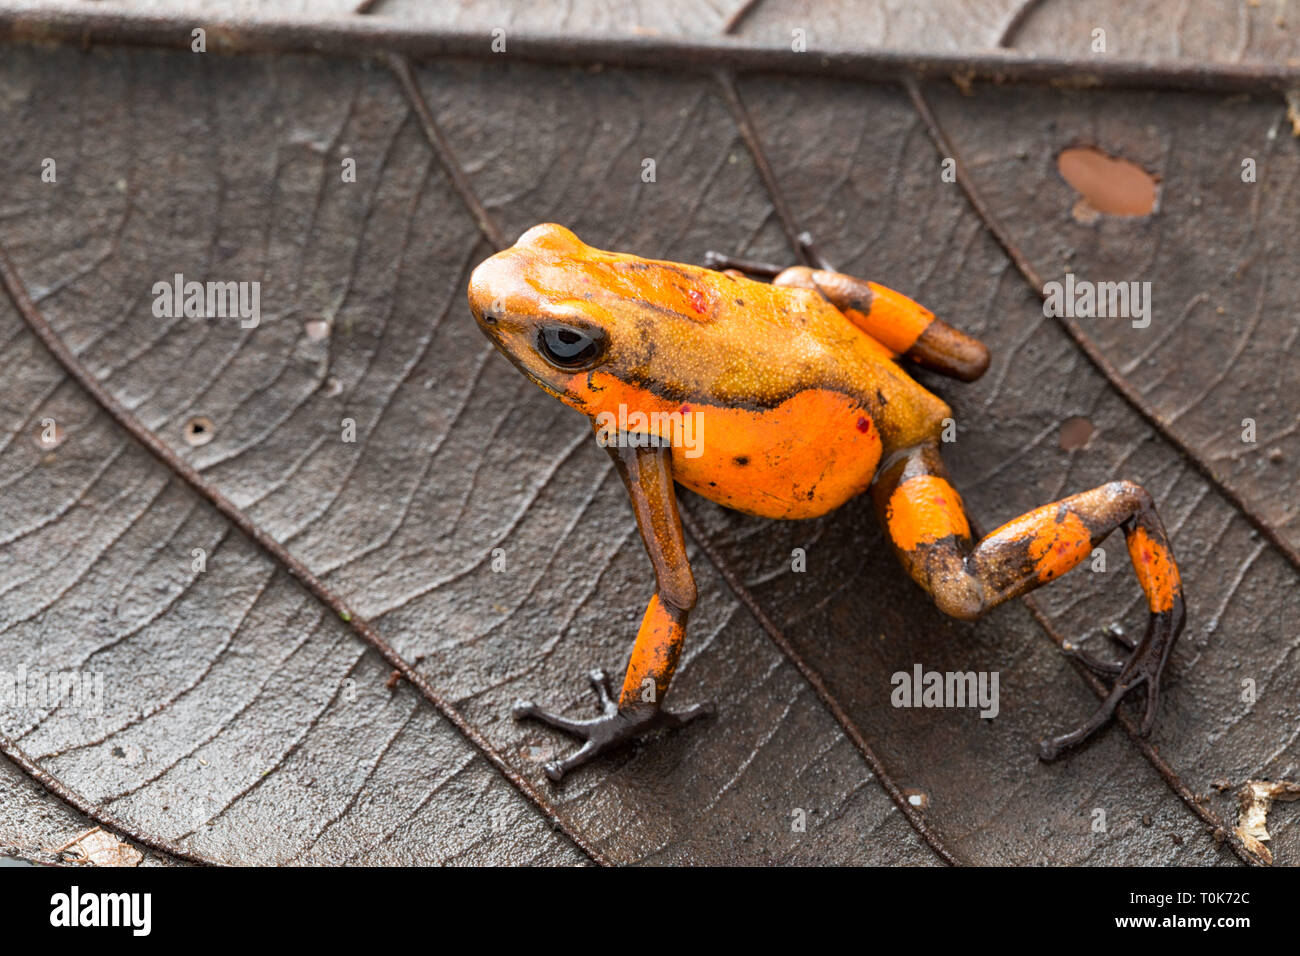 Poison dart frog, Oophaga histrionica. A small poisonous animal from the rain forest of Colombia. Stock Photo